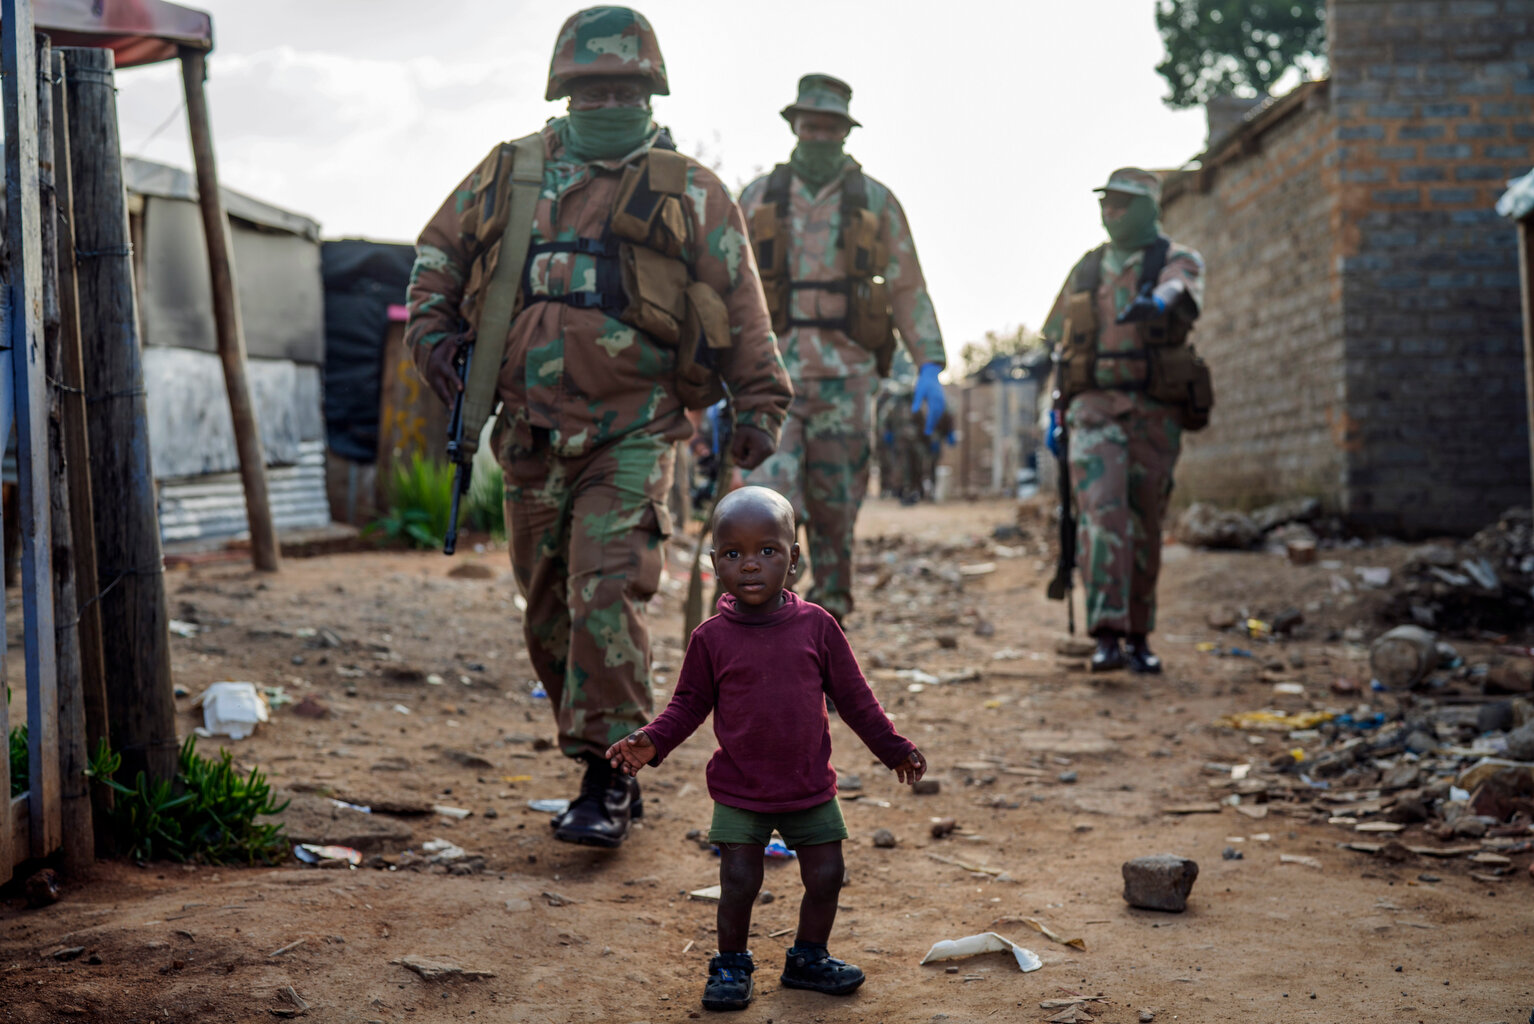  South African National Defense Forces patrol the Sjwetla informal settlement after pushing back residents into their homes, on the outskirts of the Alexandra township in Johannesburg, Monday, April 20, 2020. (AP Photo/Jerome Delay) 